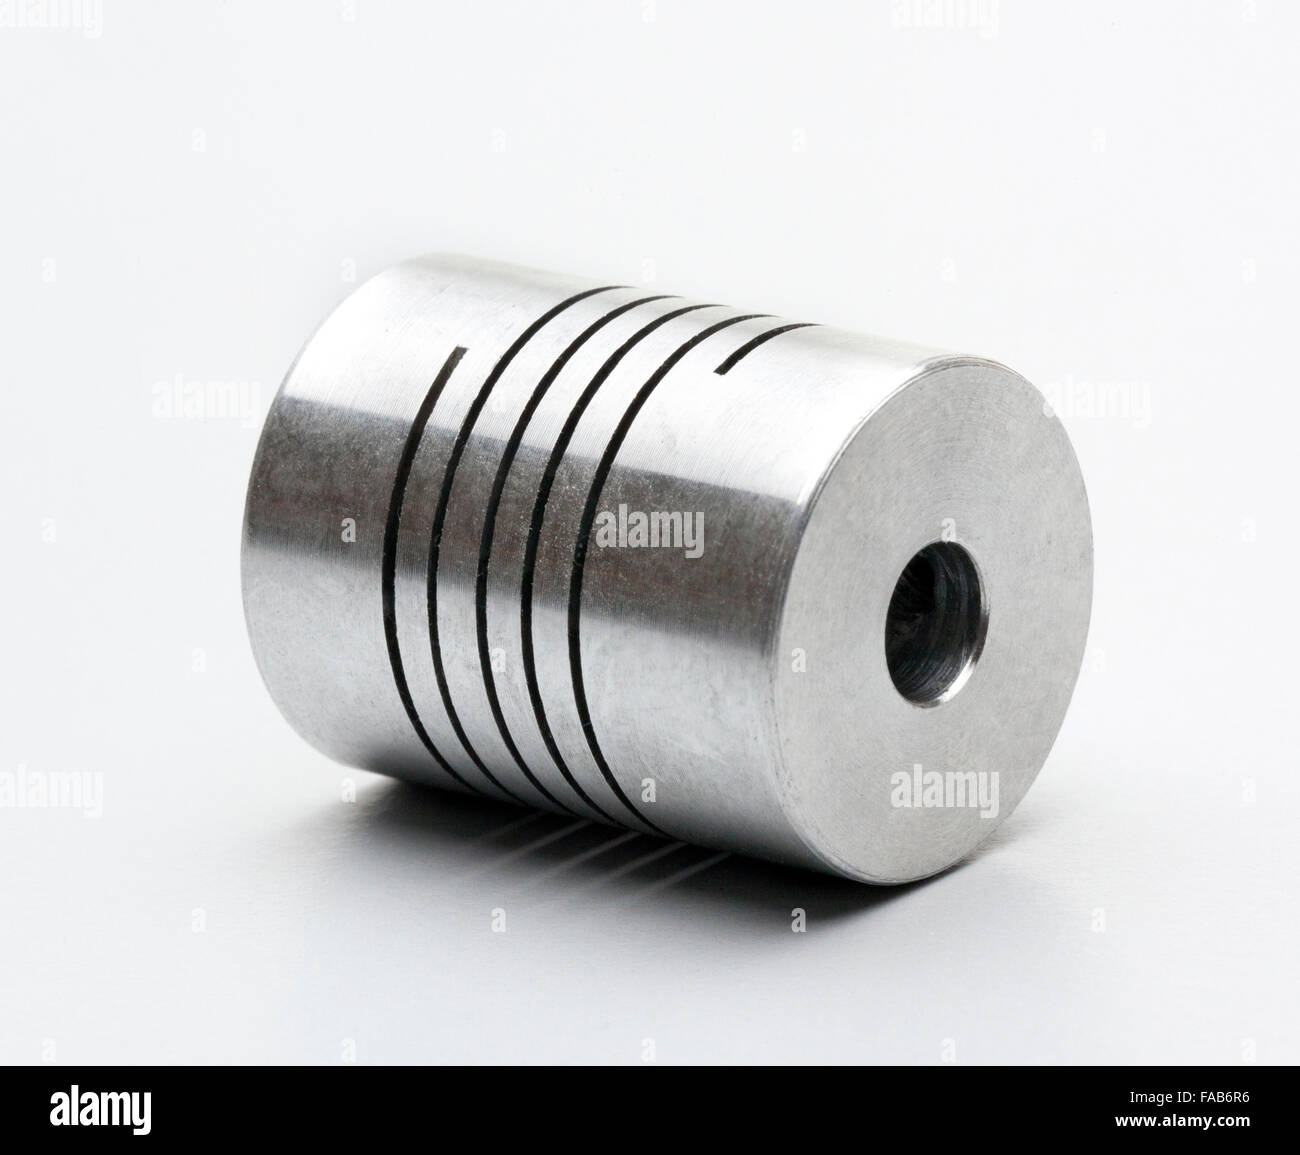 flexible joint coupling Stock Photo